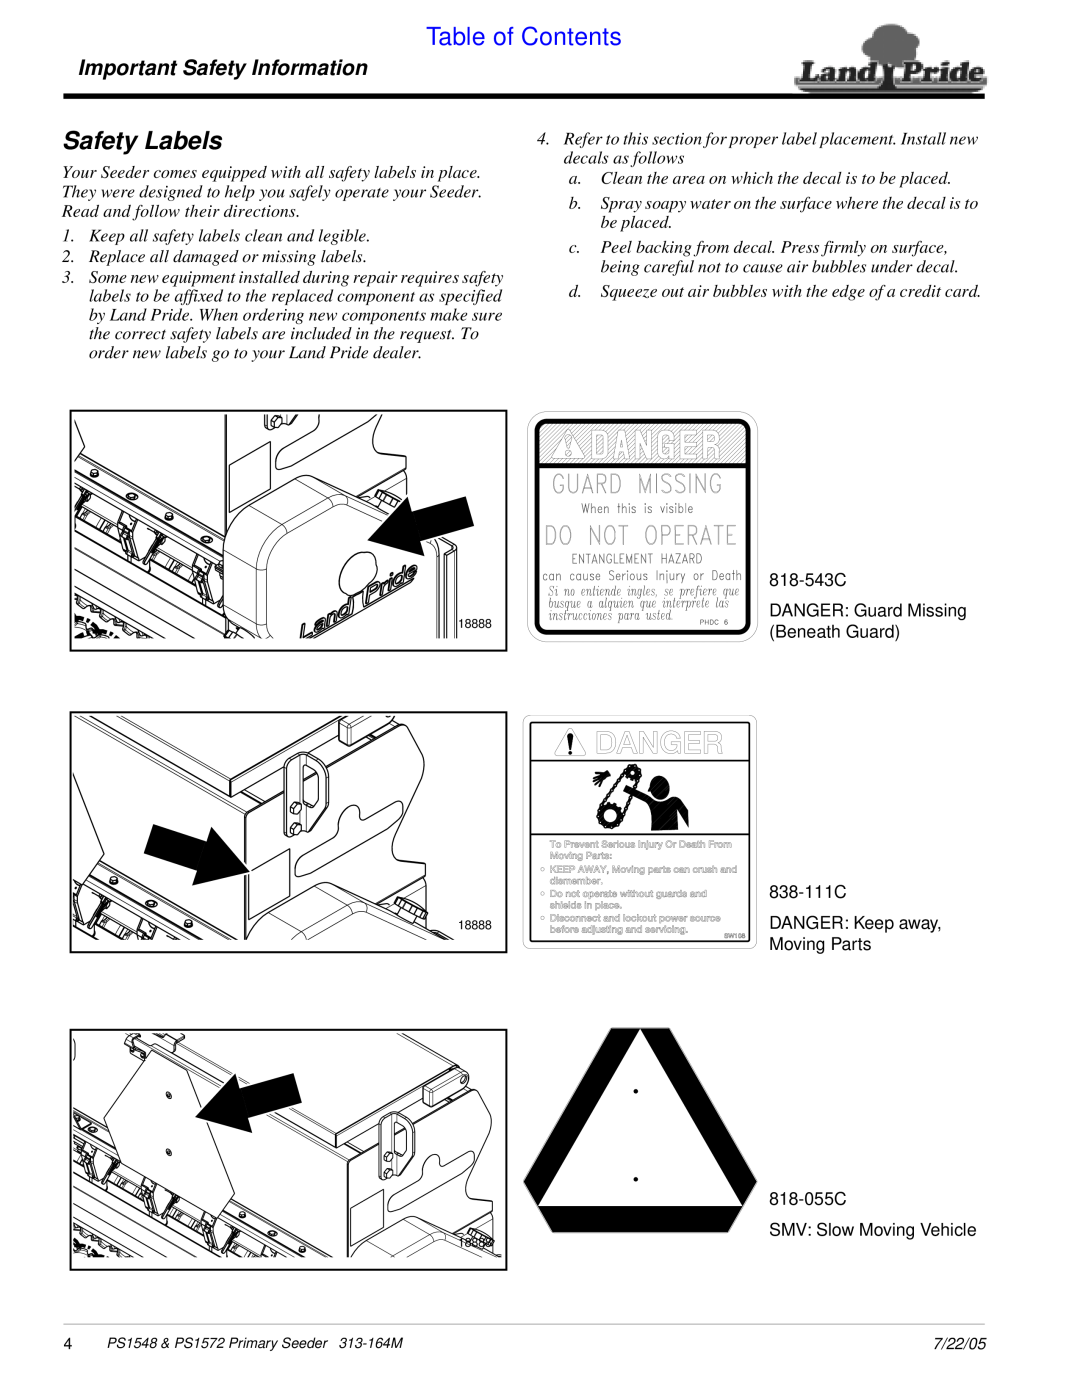 Land Pride PS1548 manual Safety Labels, 818-055C, SMV Slow Moving Vehicle, Table of Contents, Important Safety Information 